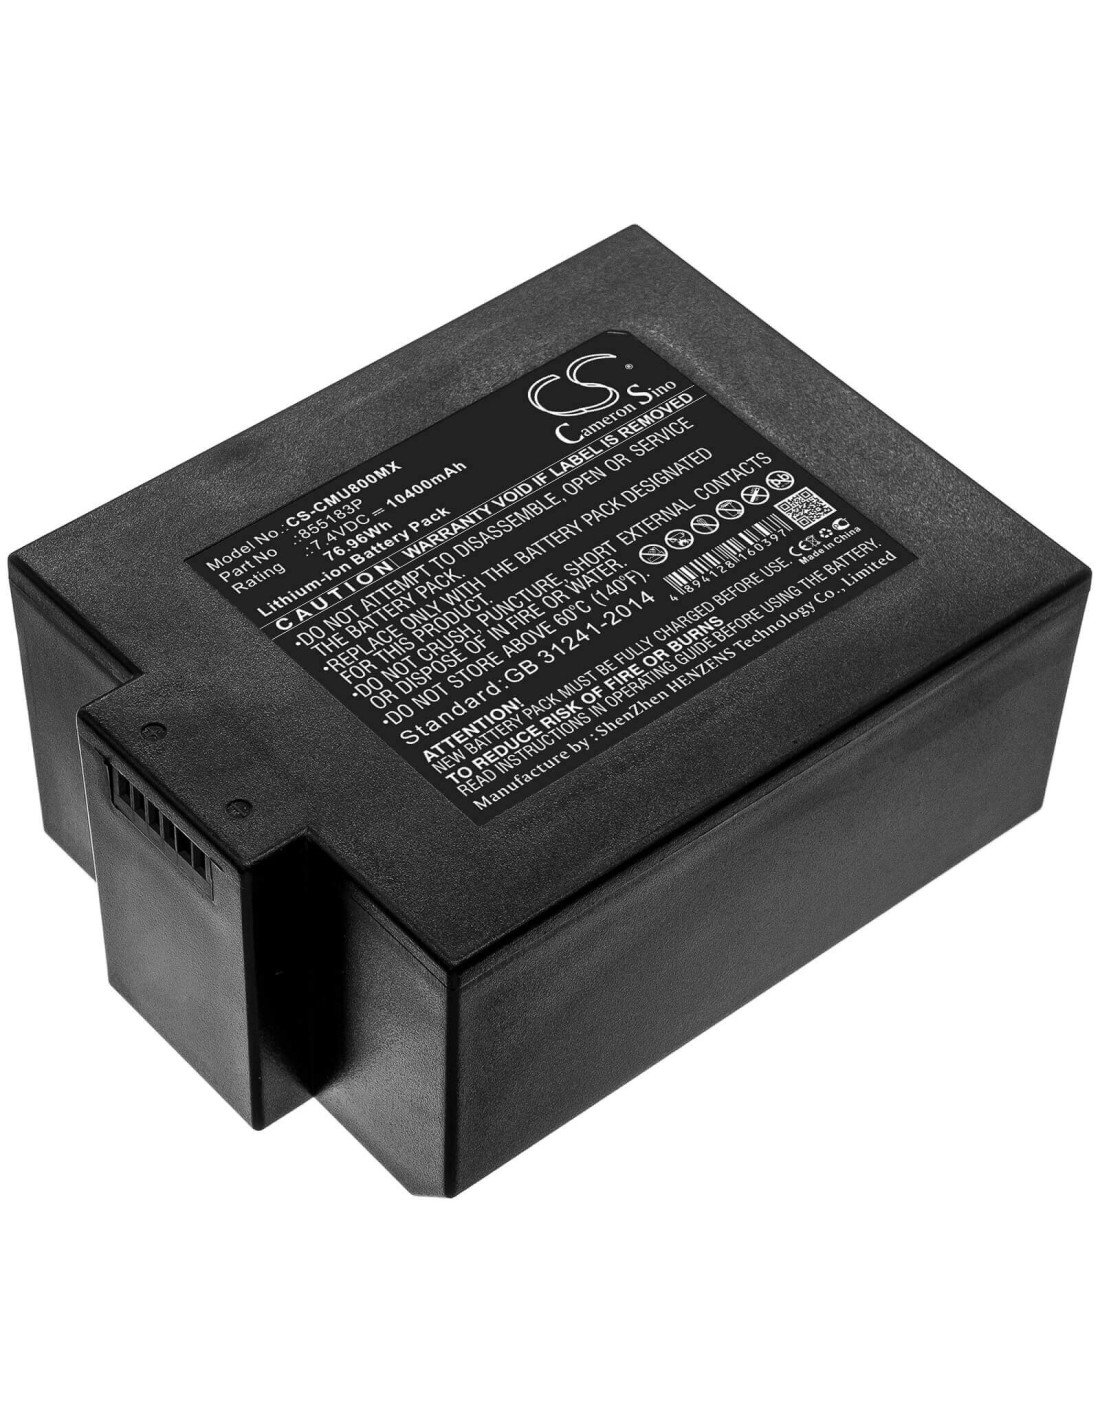 Battery for Contec, Cms8000 Icu Patient Monitor 7.4V, 10400mAh - 76.96Wh